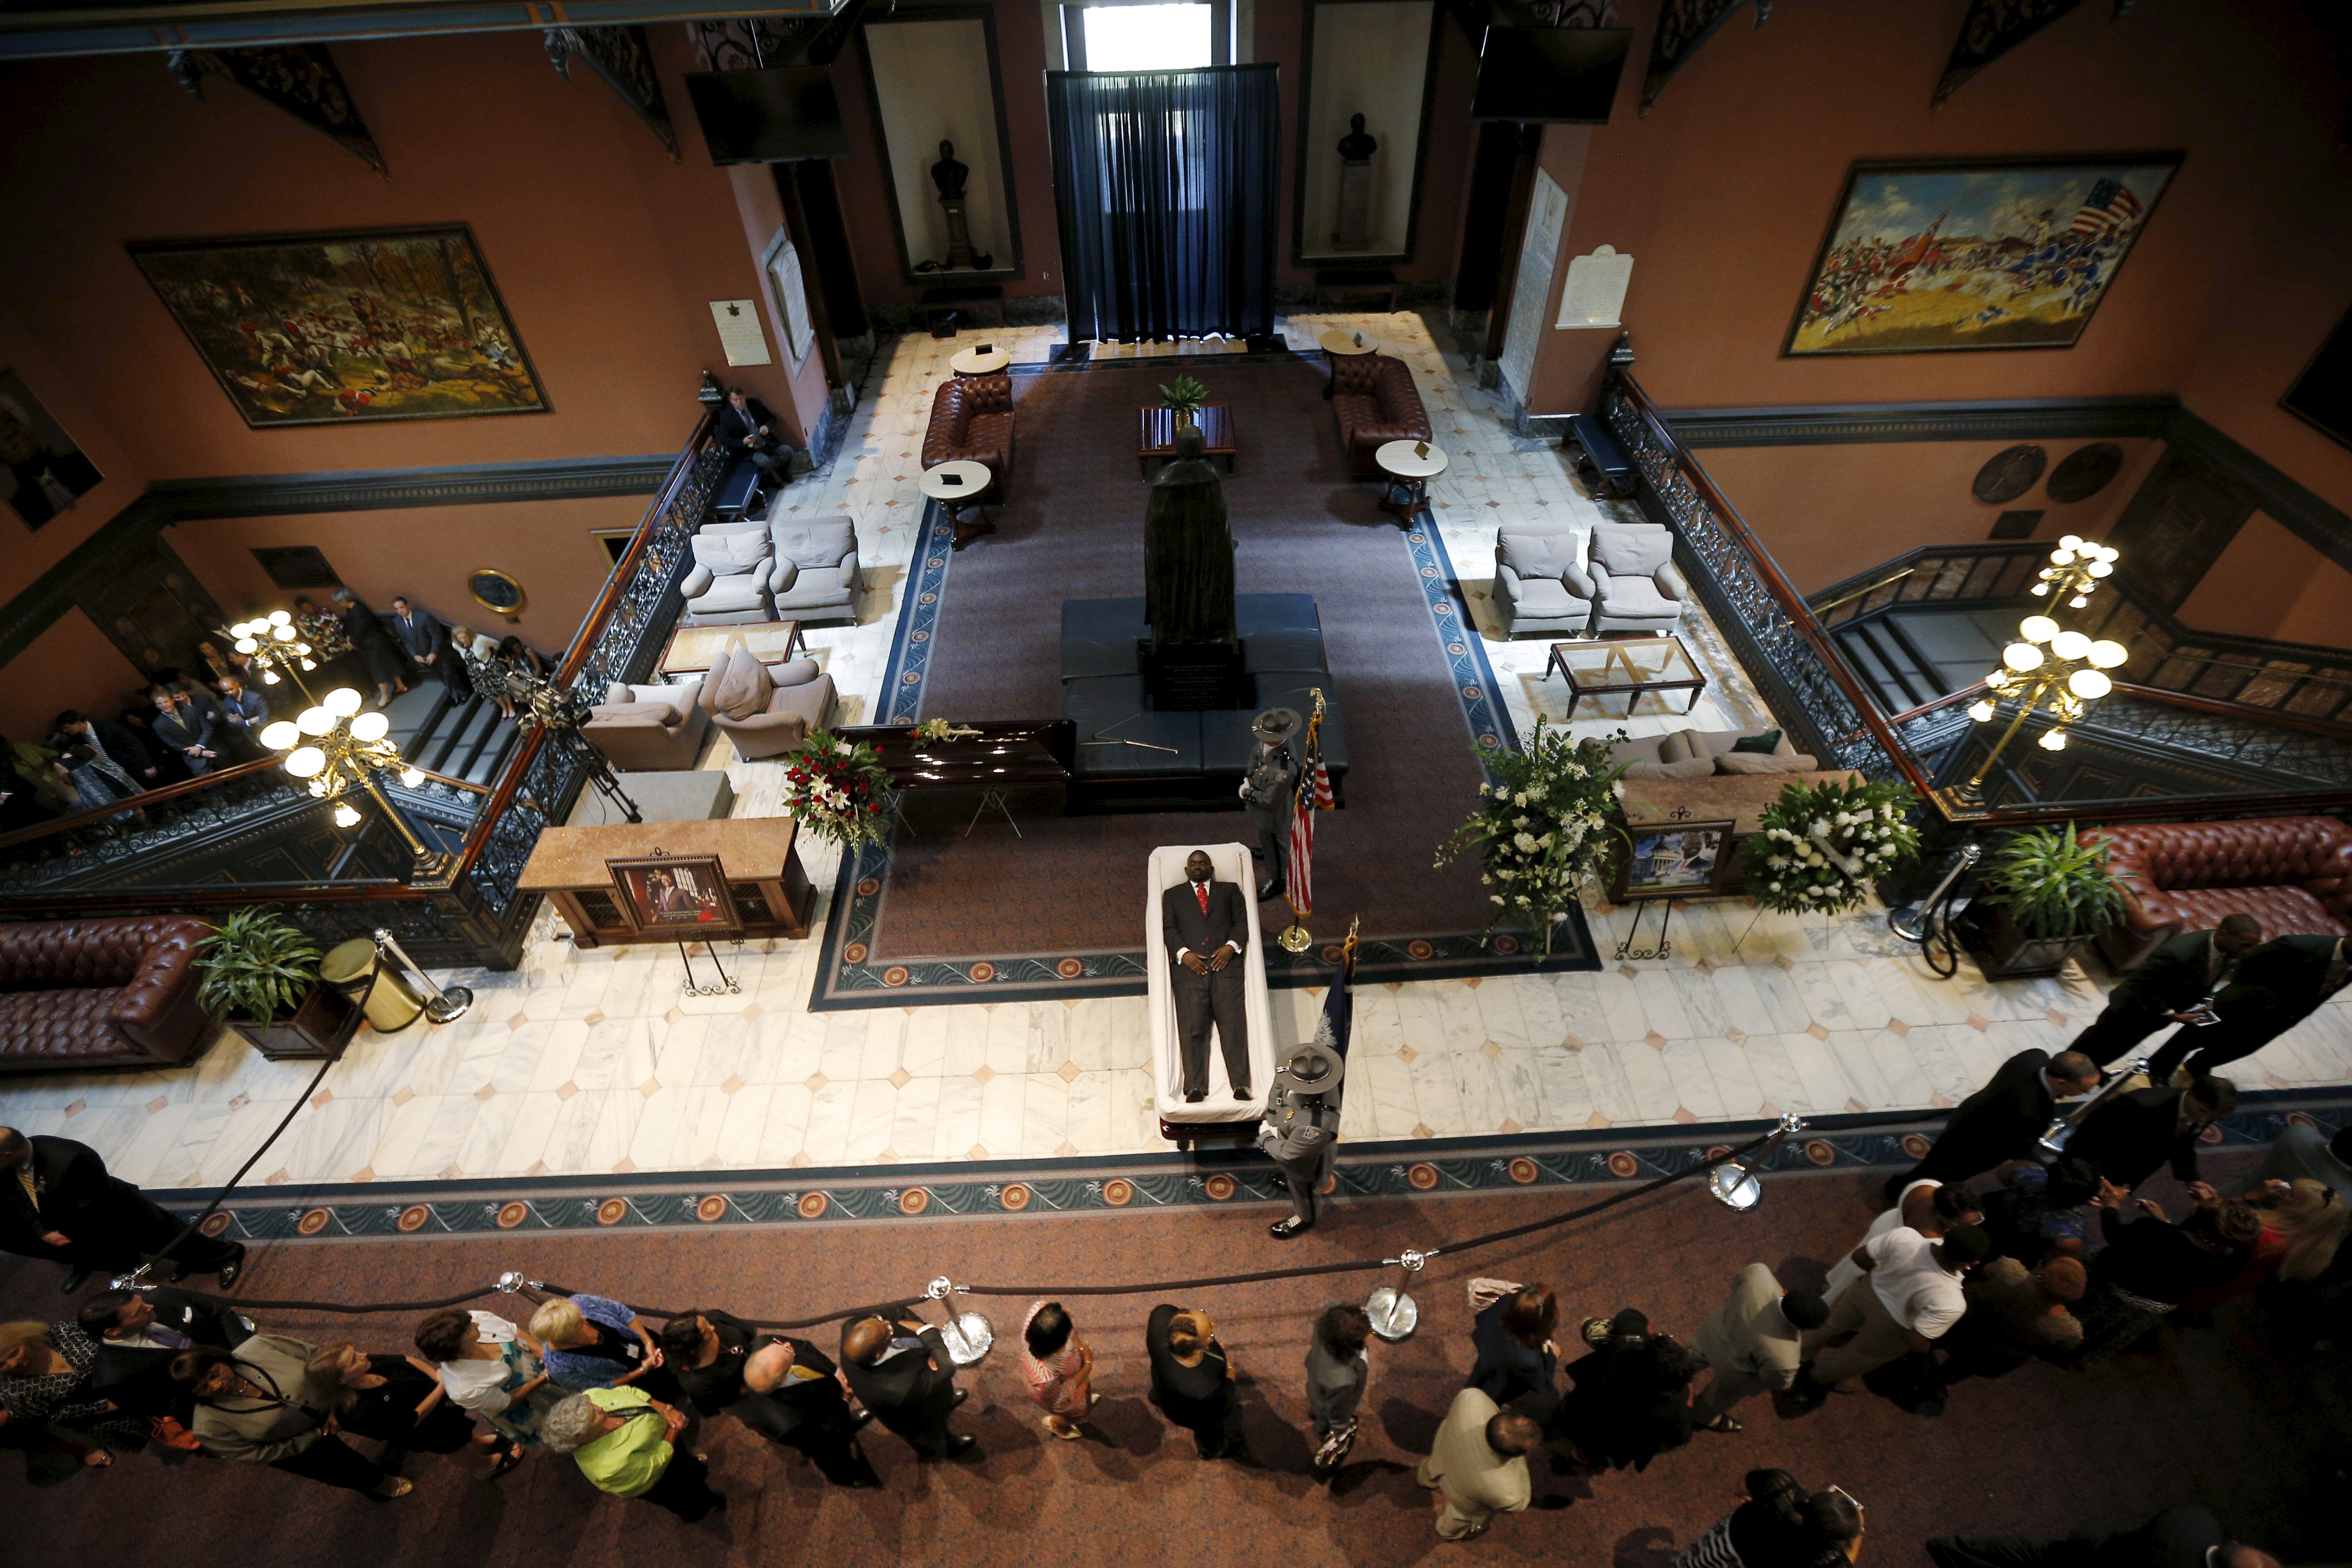 Mourners pay their respects at the casket of the late South Carolina State Senator Clementa Pinckney as he lies in state inside the rotunda of the State Capitol in Columbia